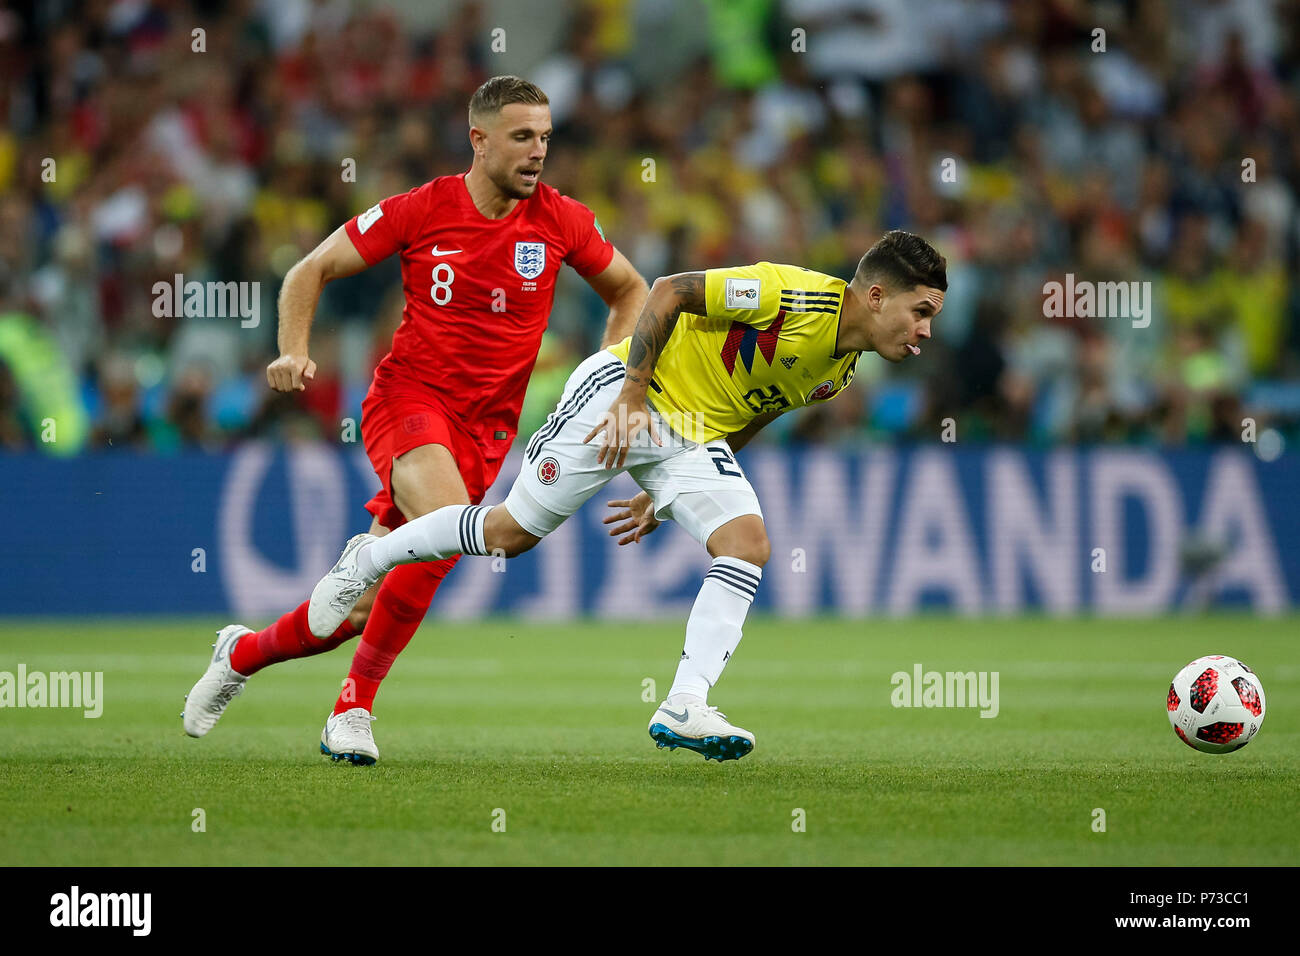 Moscow, Russia. 3rd July 2018. Jordan Henderson of England and Juan Quintero of Colombia during the 2018 FIFA World Cup Round of 16 match between Colombia and England at Spartak Stadium on July 3rd 2018 in Moscow, Russia. Credit: PHC Images/Alamy Live News Stock Photo